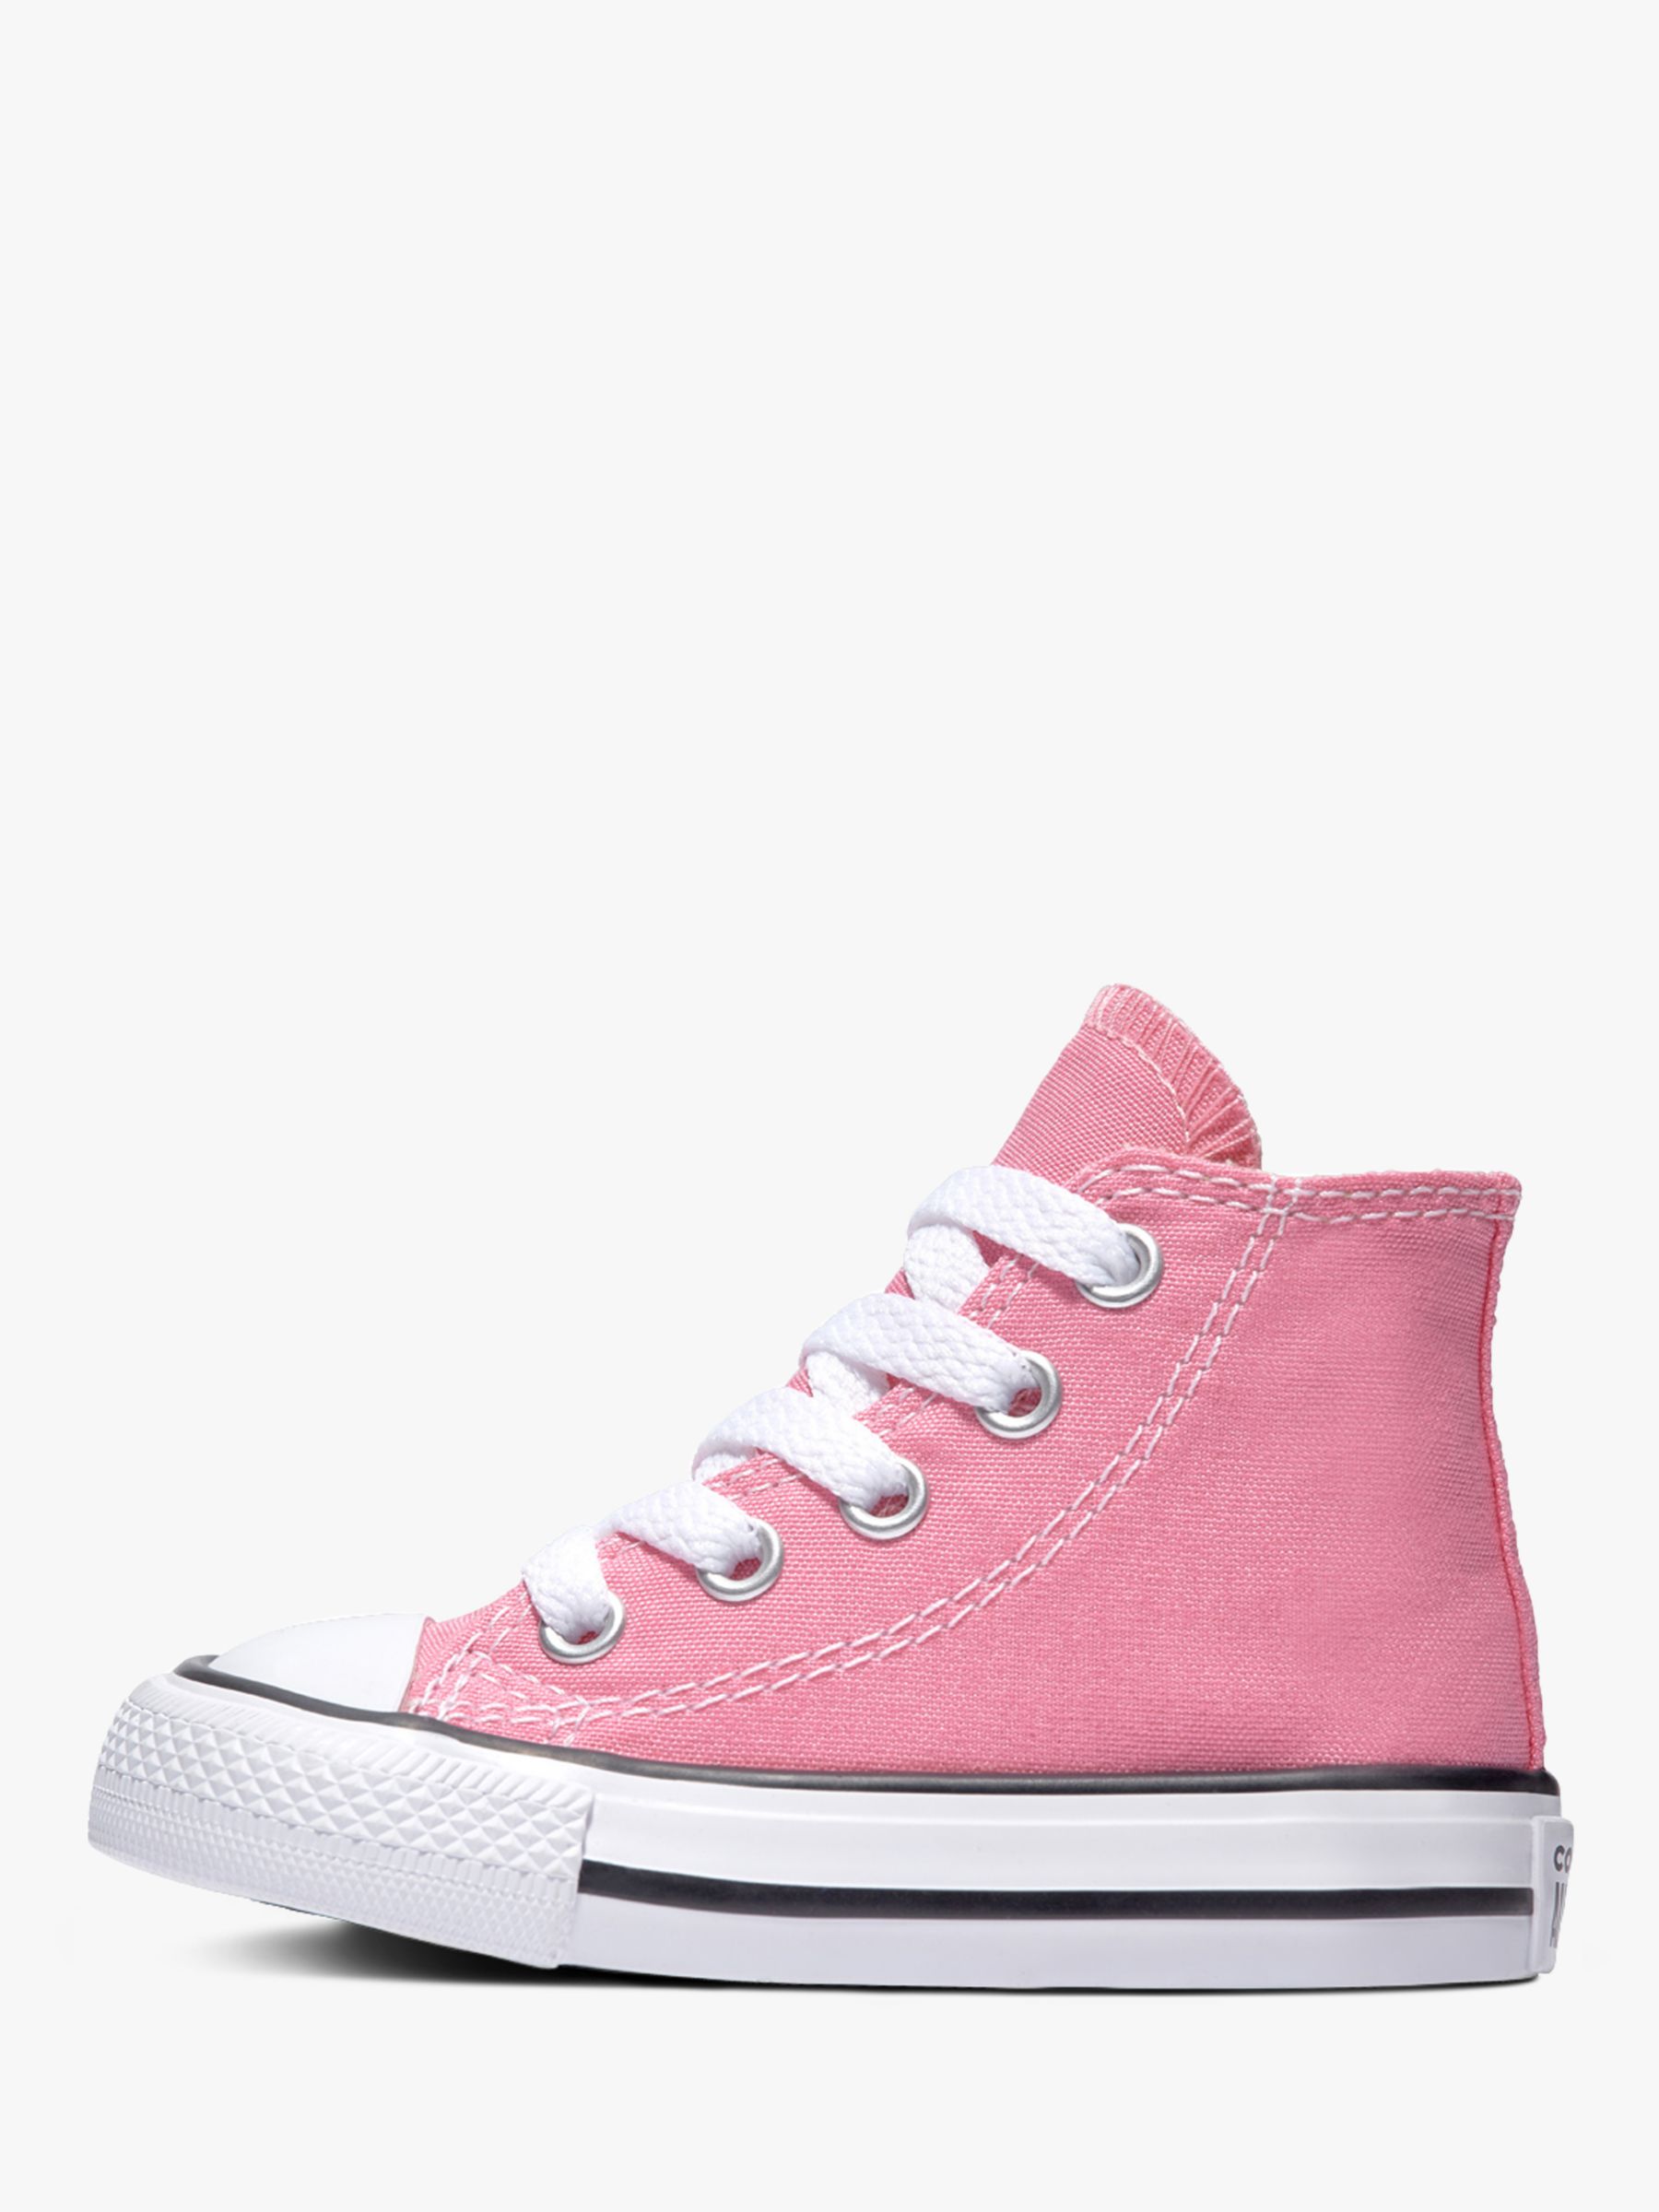 Converse Children's Chuck Taylor All Star Core Hi-Top Trainers, Pink at ...